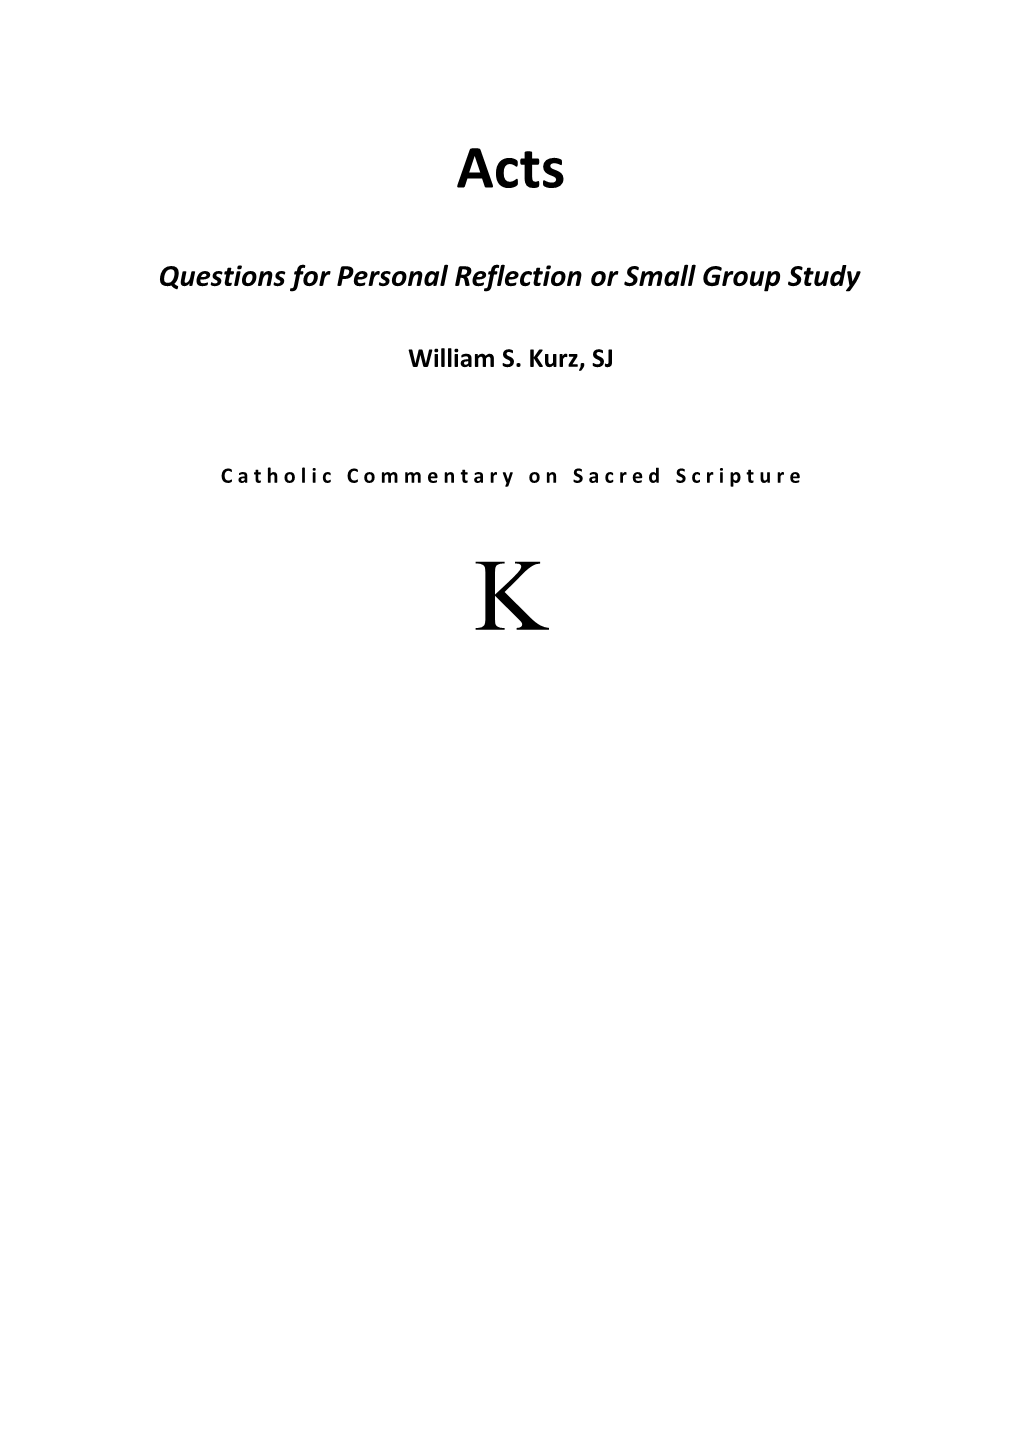 Questions for Personal Reflection Or Small Group Study